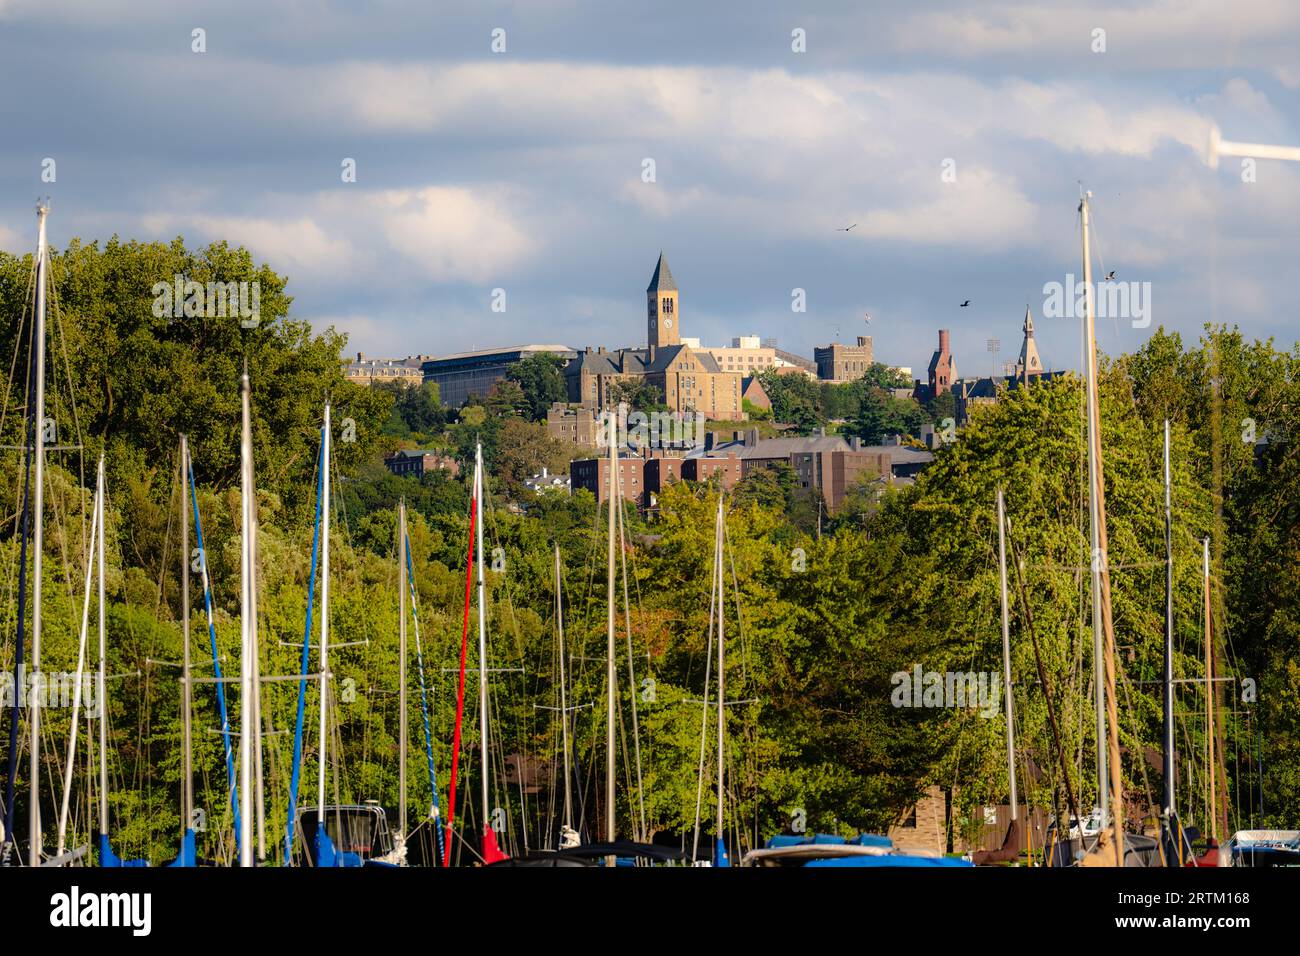 Late afternoon image of the area surrounding the City of Ithaca, NY, USA taken from Allan H Treman State Marine Park. Stock Photo